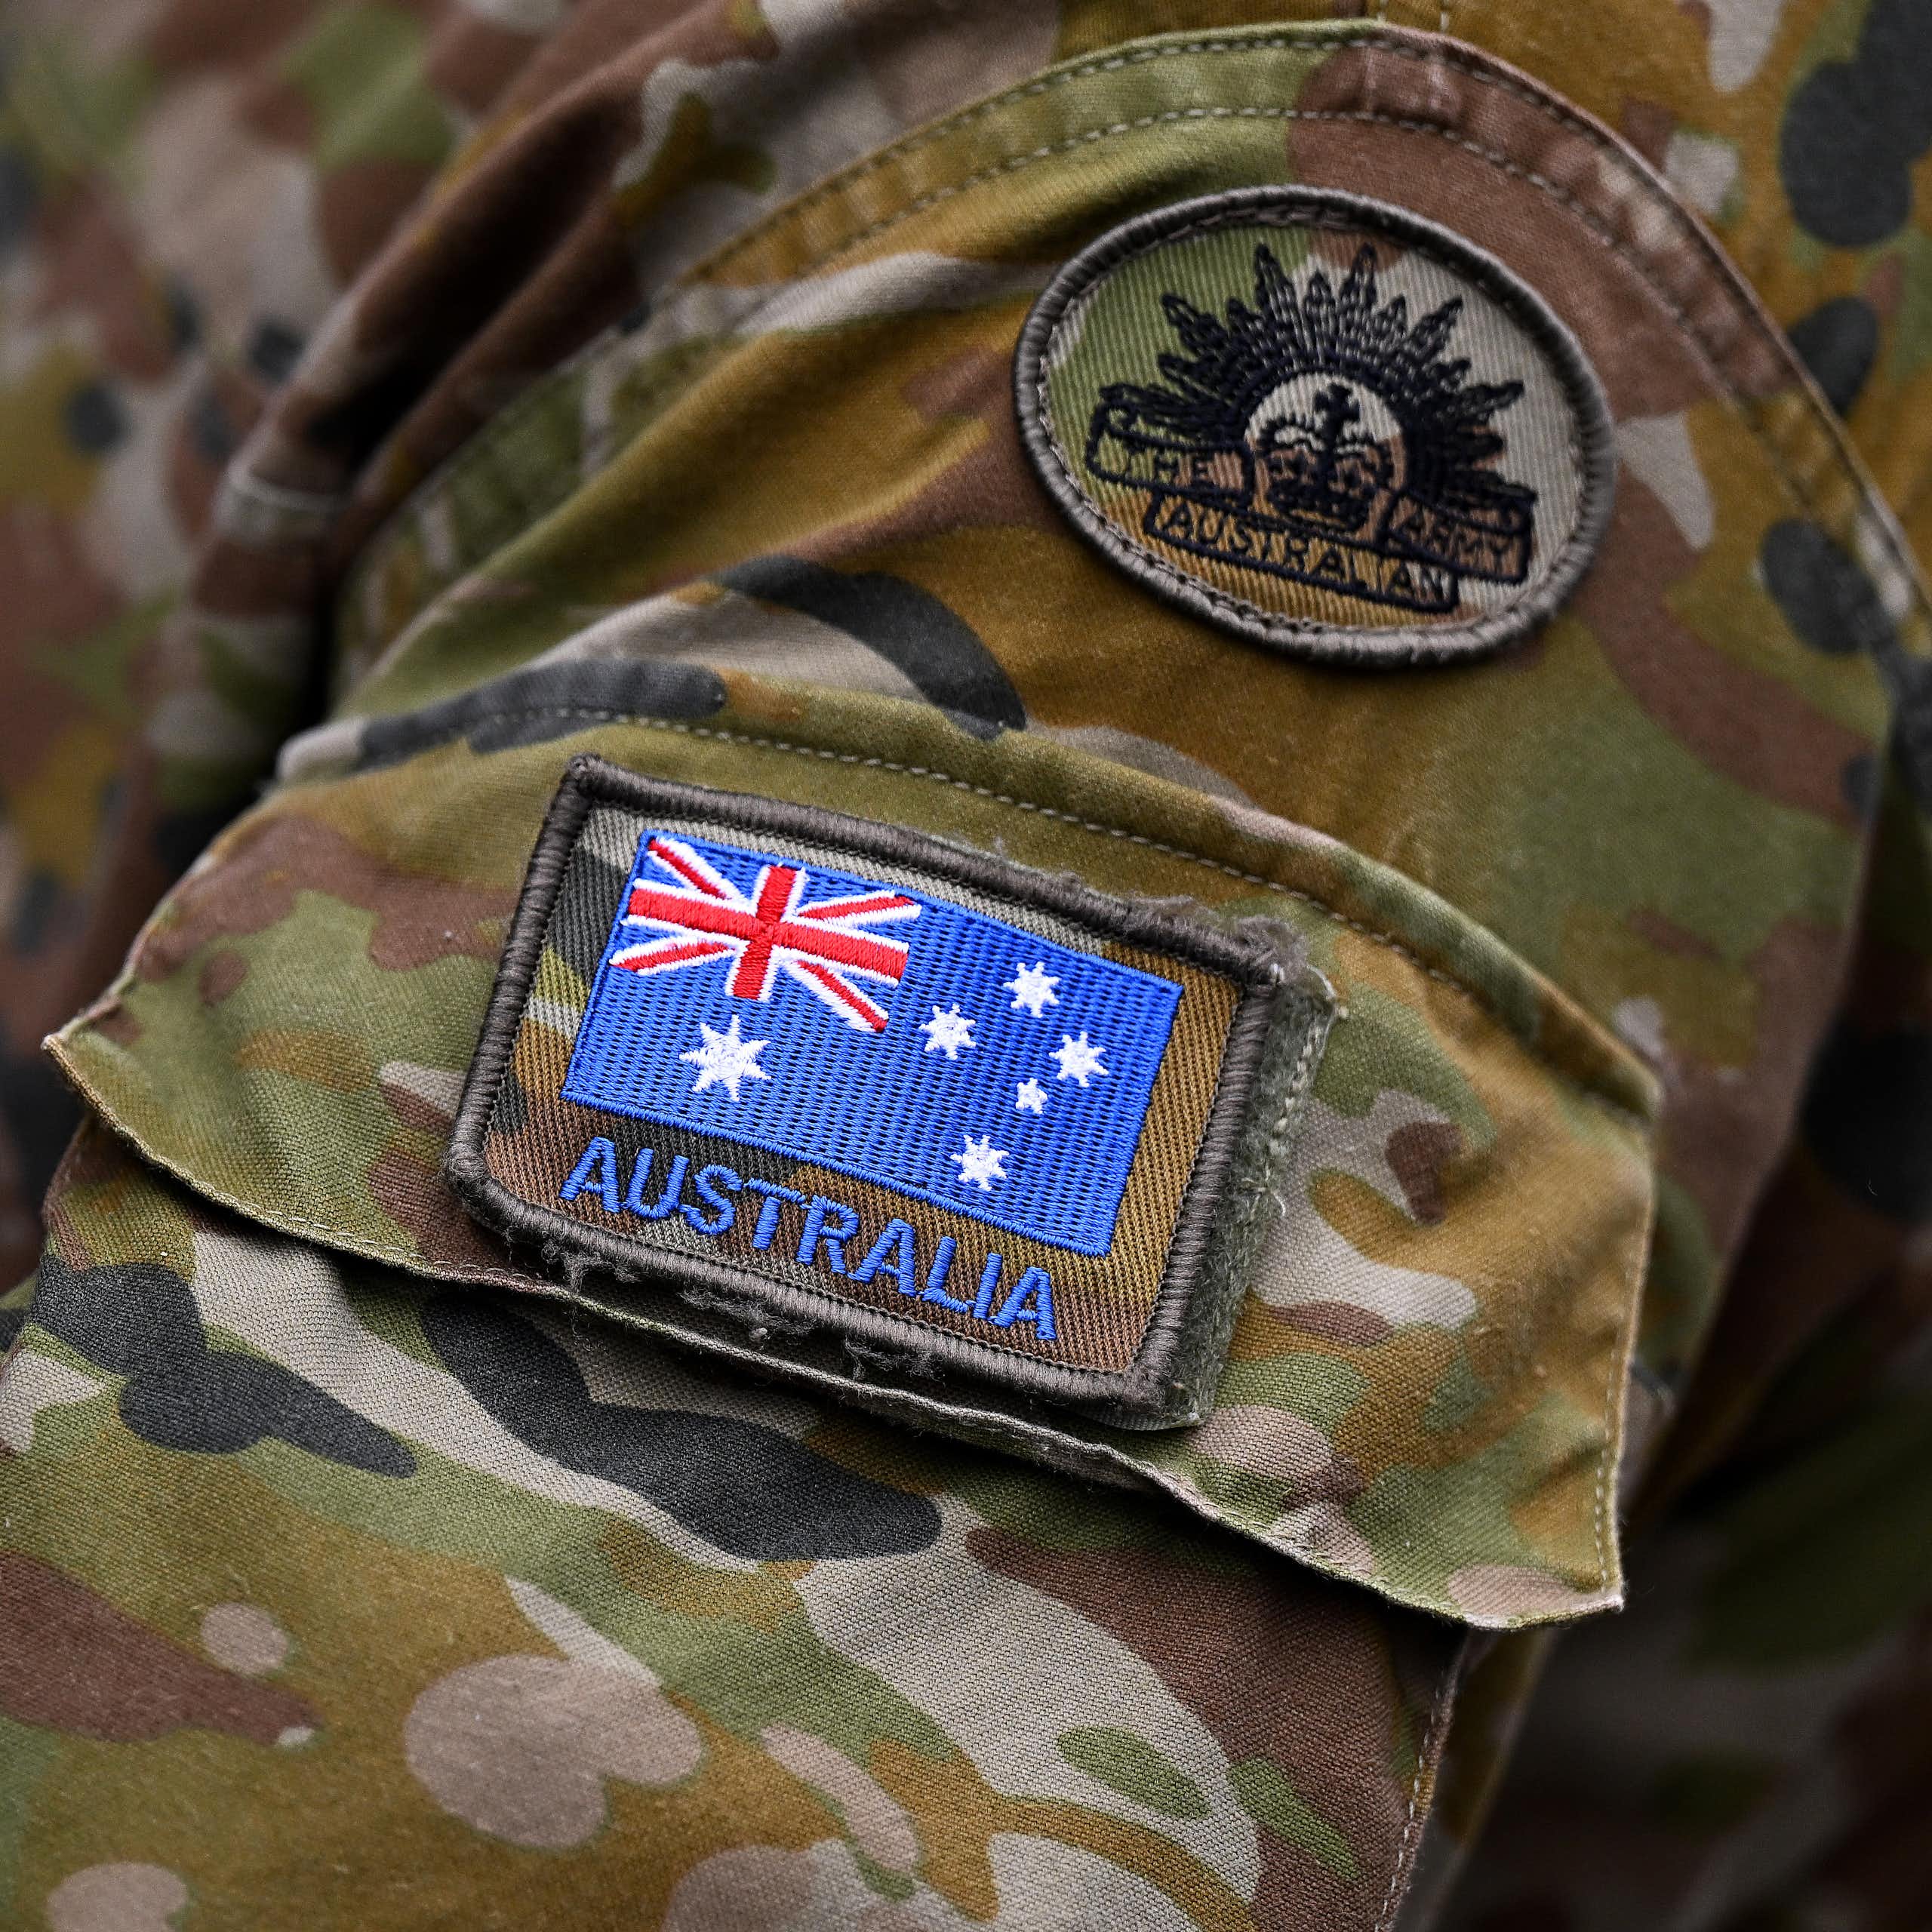 Australia’s new defence strategy is big on ideas, but lacks one key ingredient: well-trained soldiers